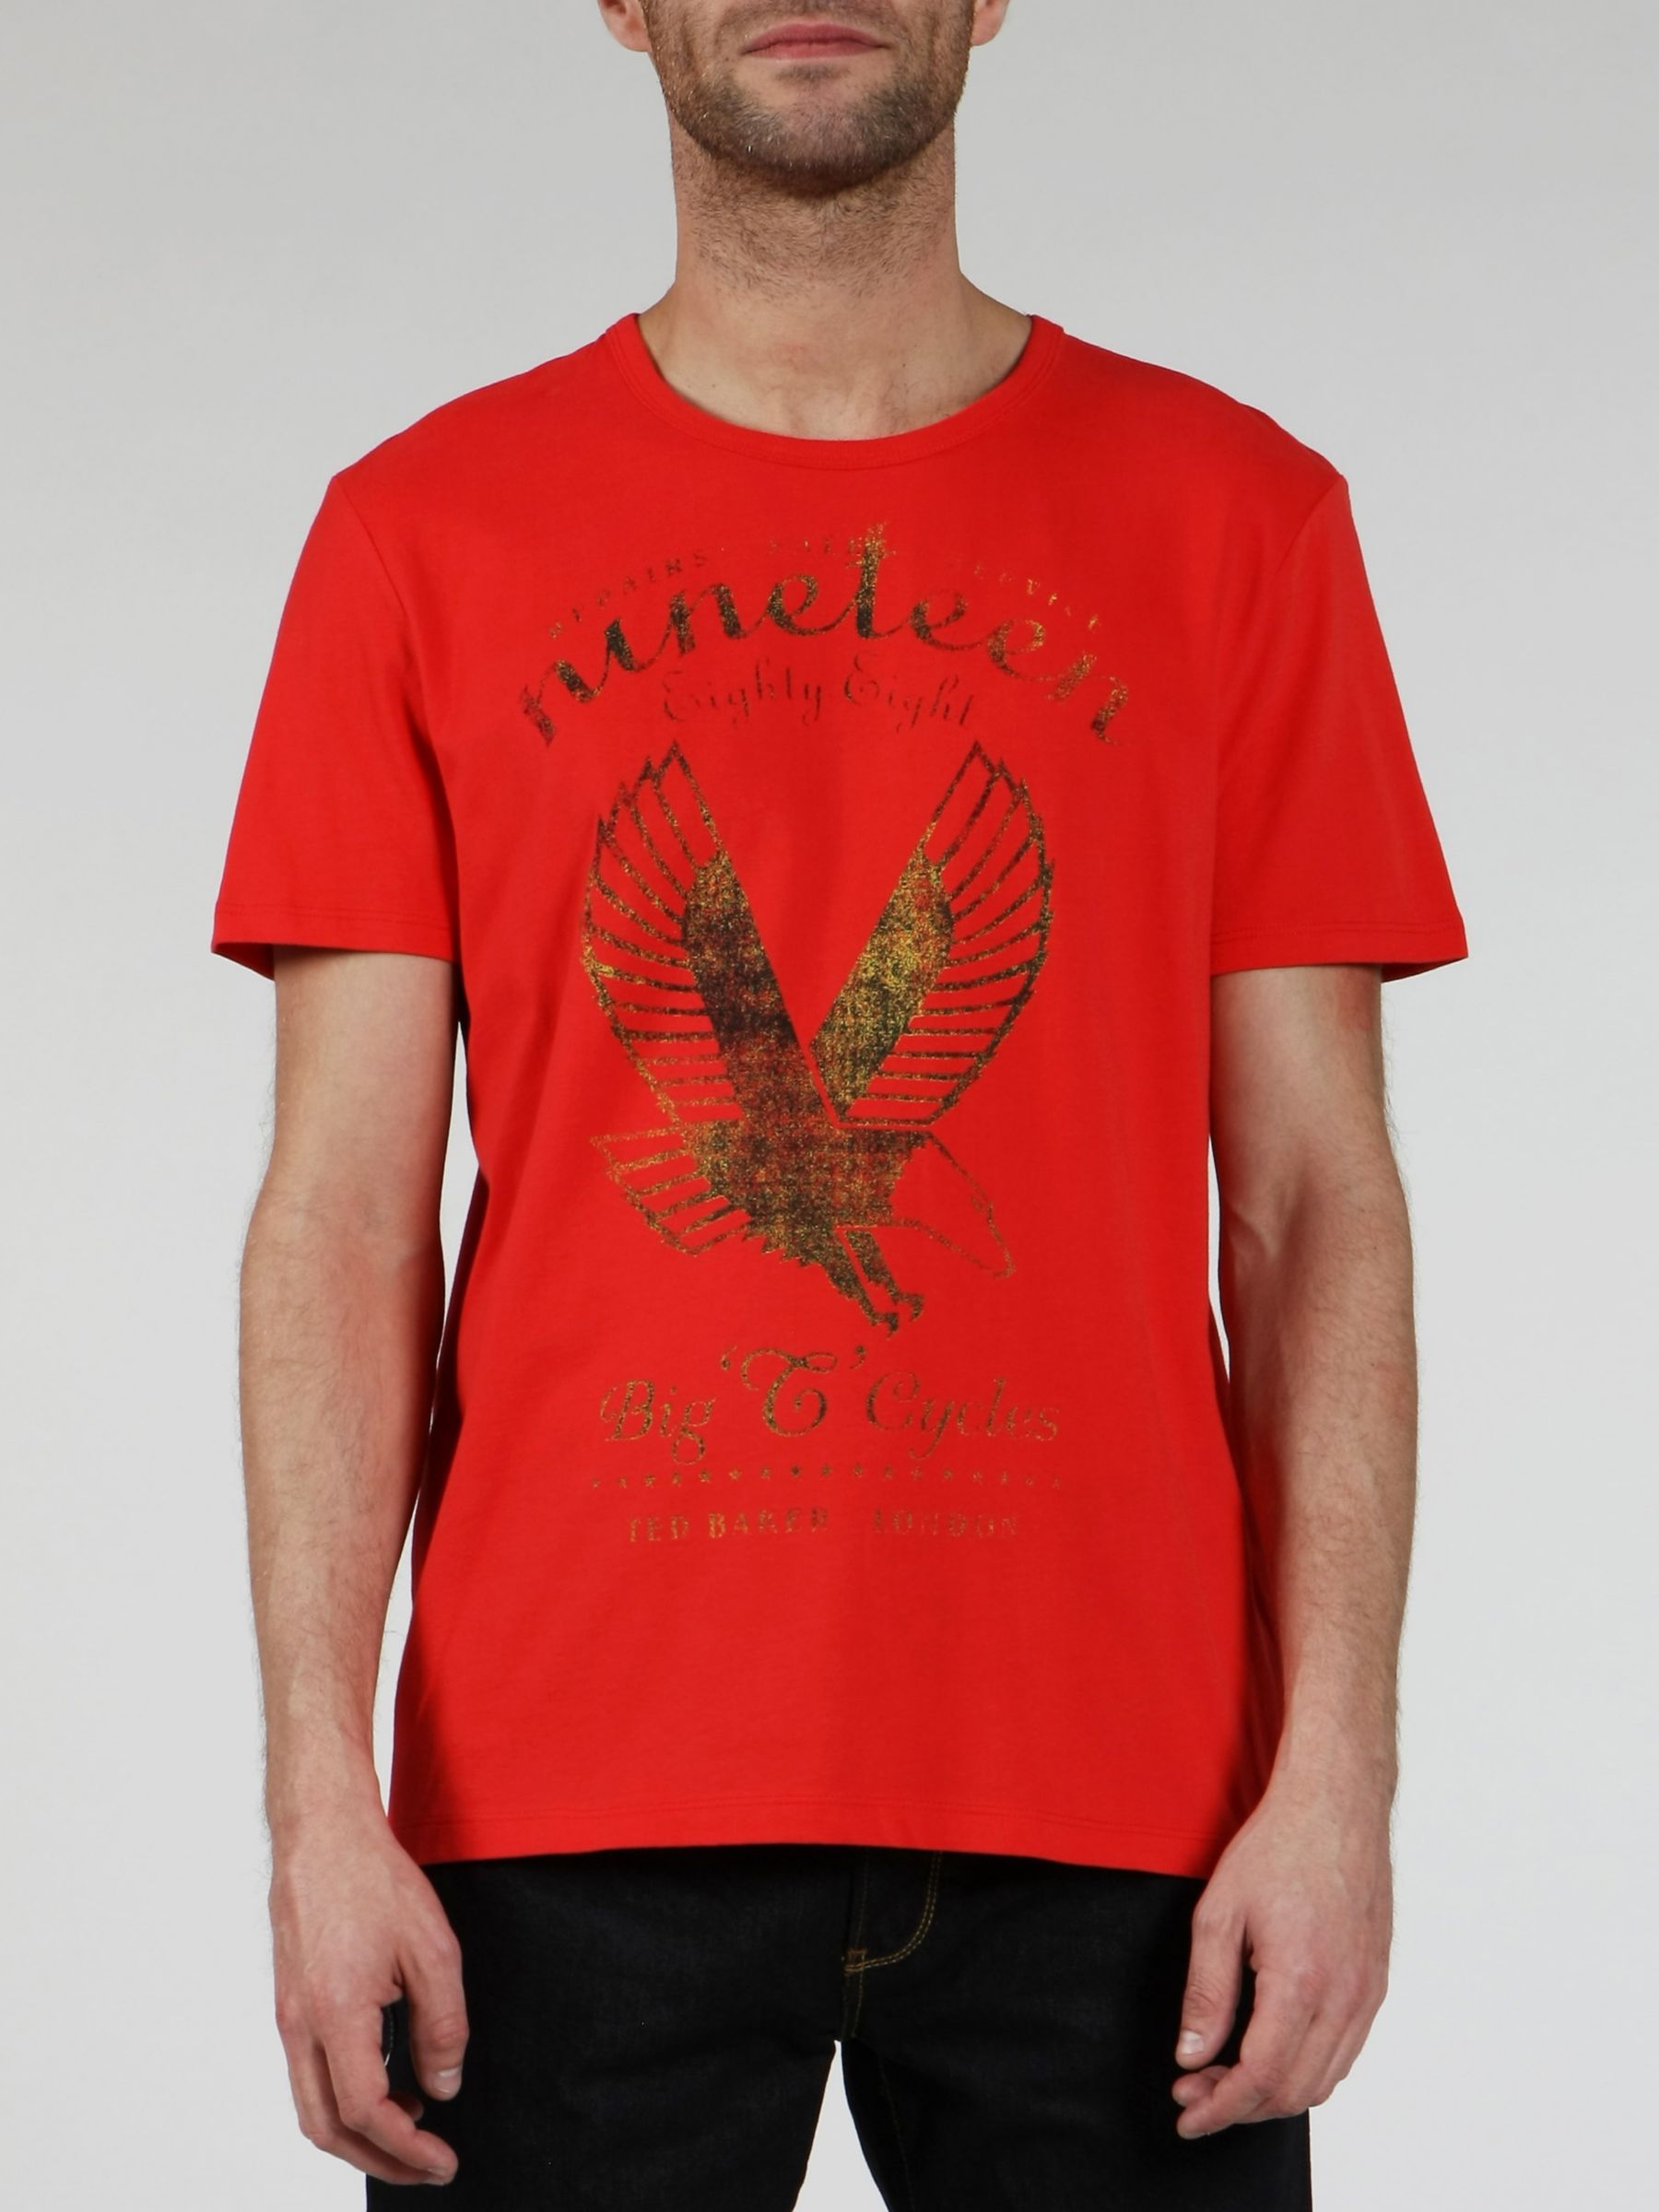 Ted Baker Short-Sleeve Graphic T-Shirt, Red